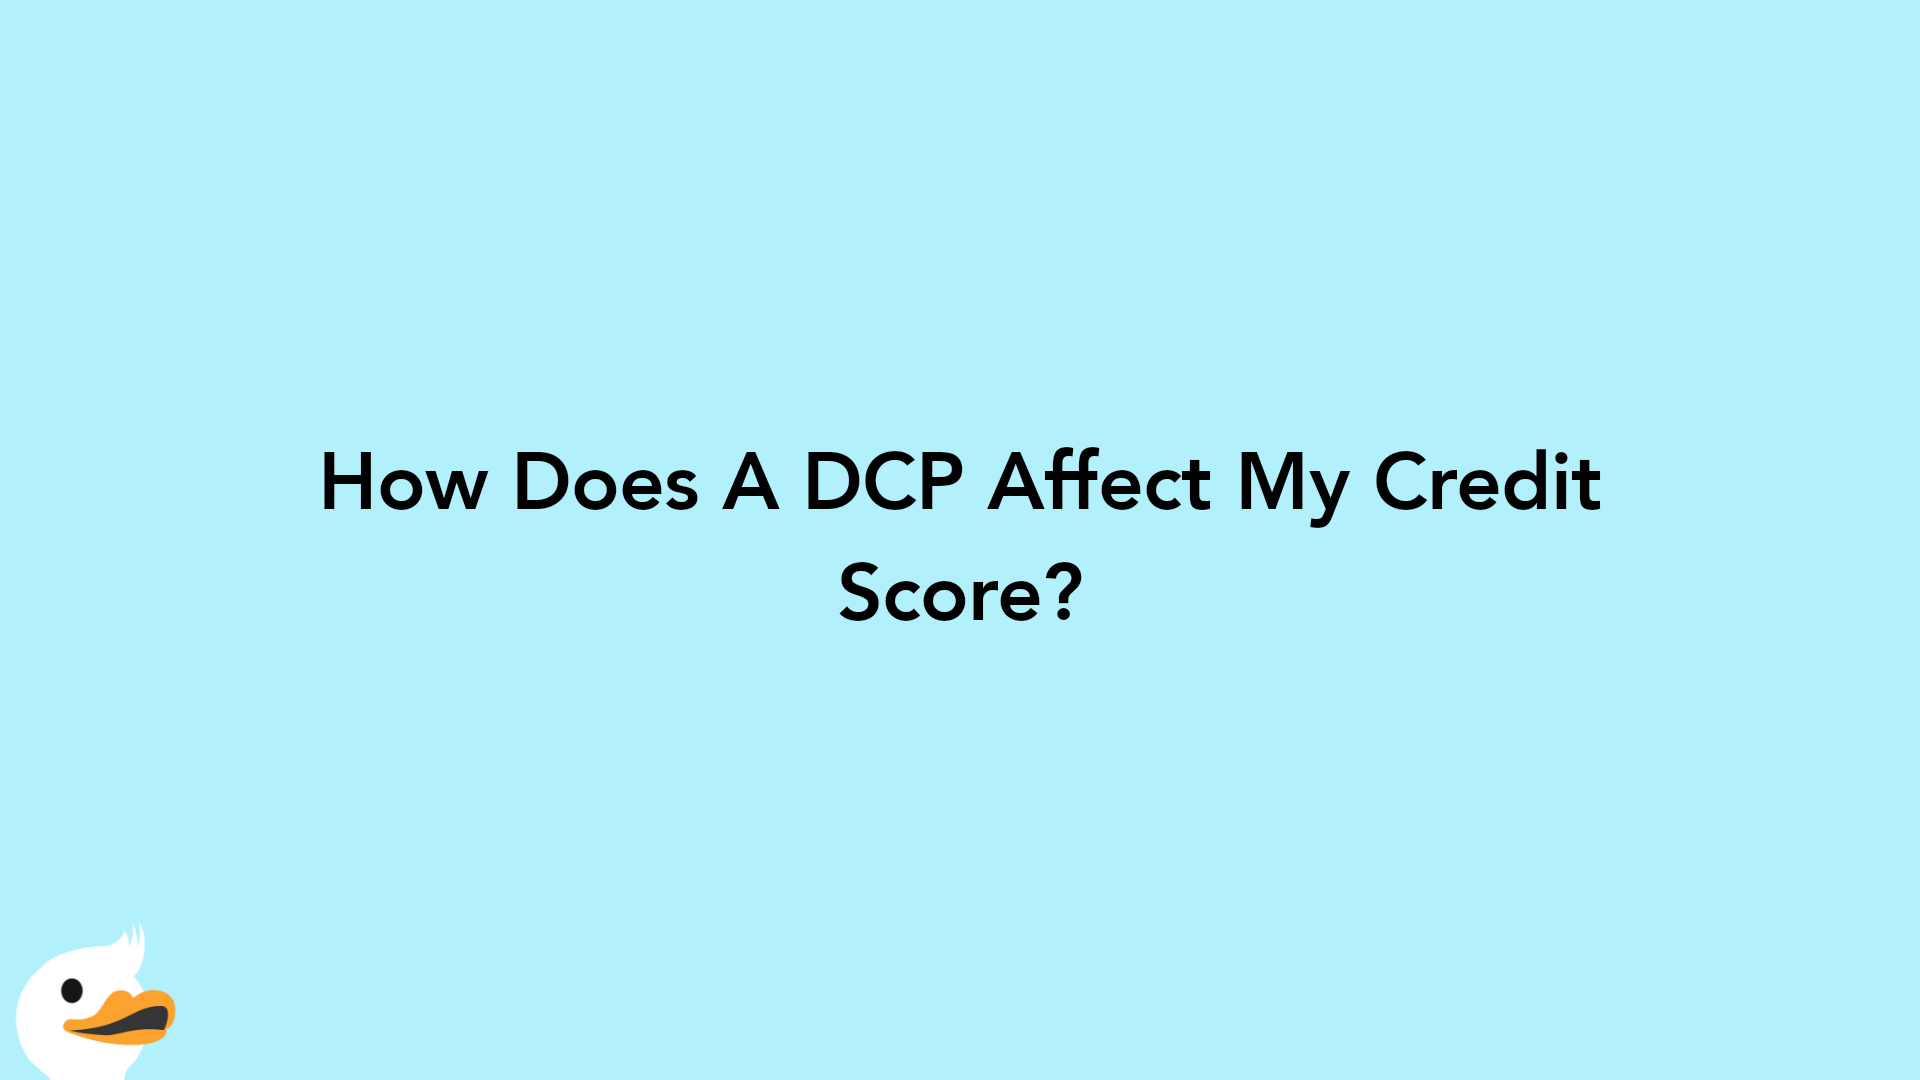 How Does A DCP Affect My Credit Score?